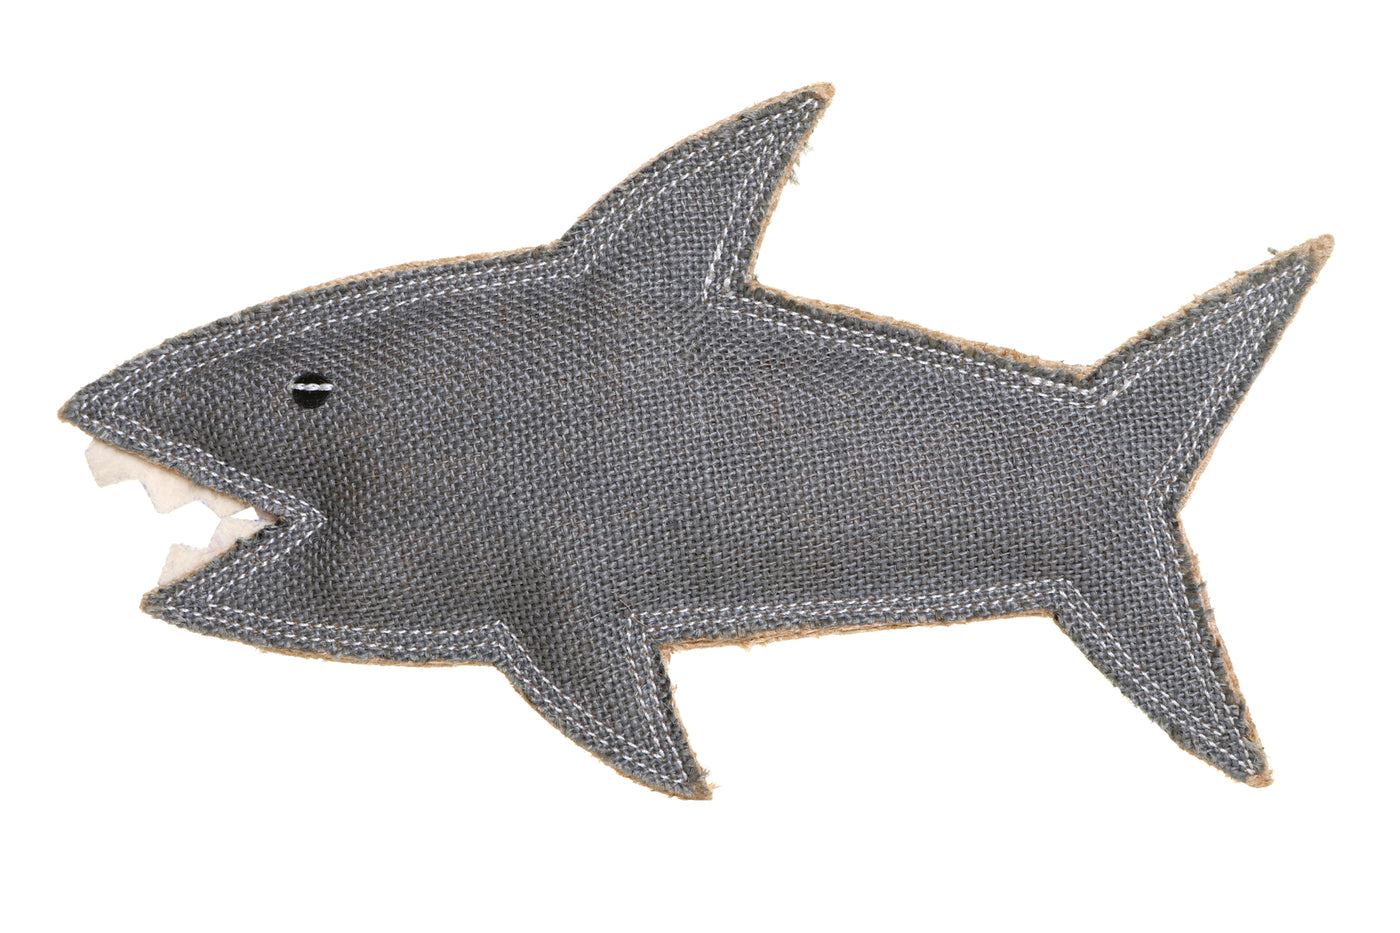 Outback Animal Toy - Shazza the Great White Shark